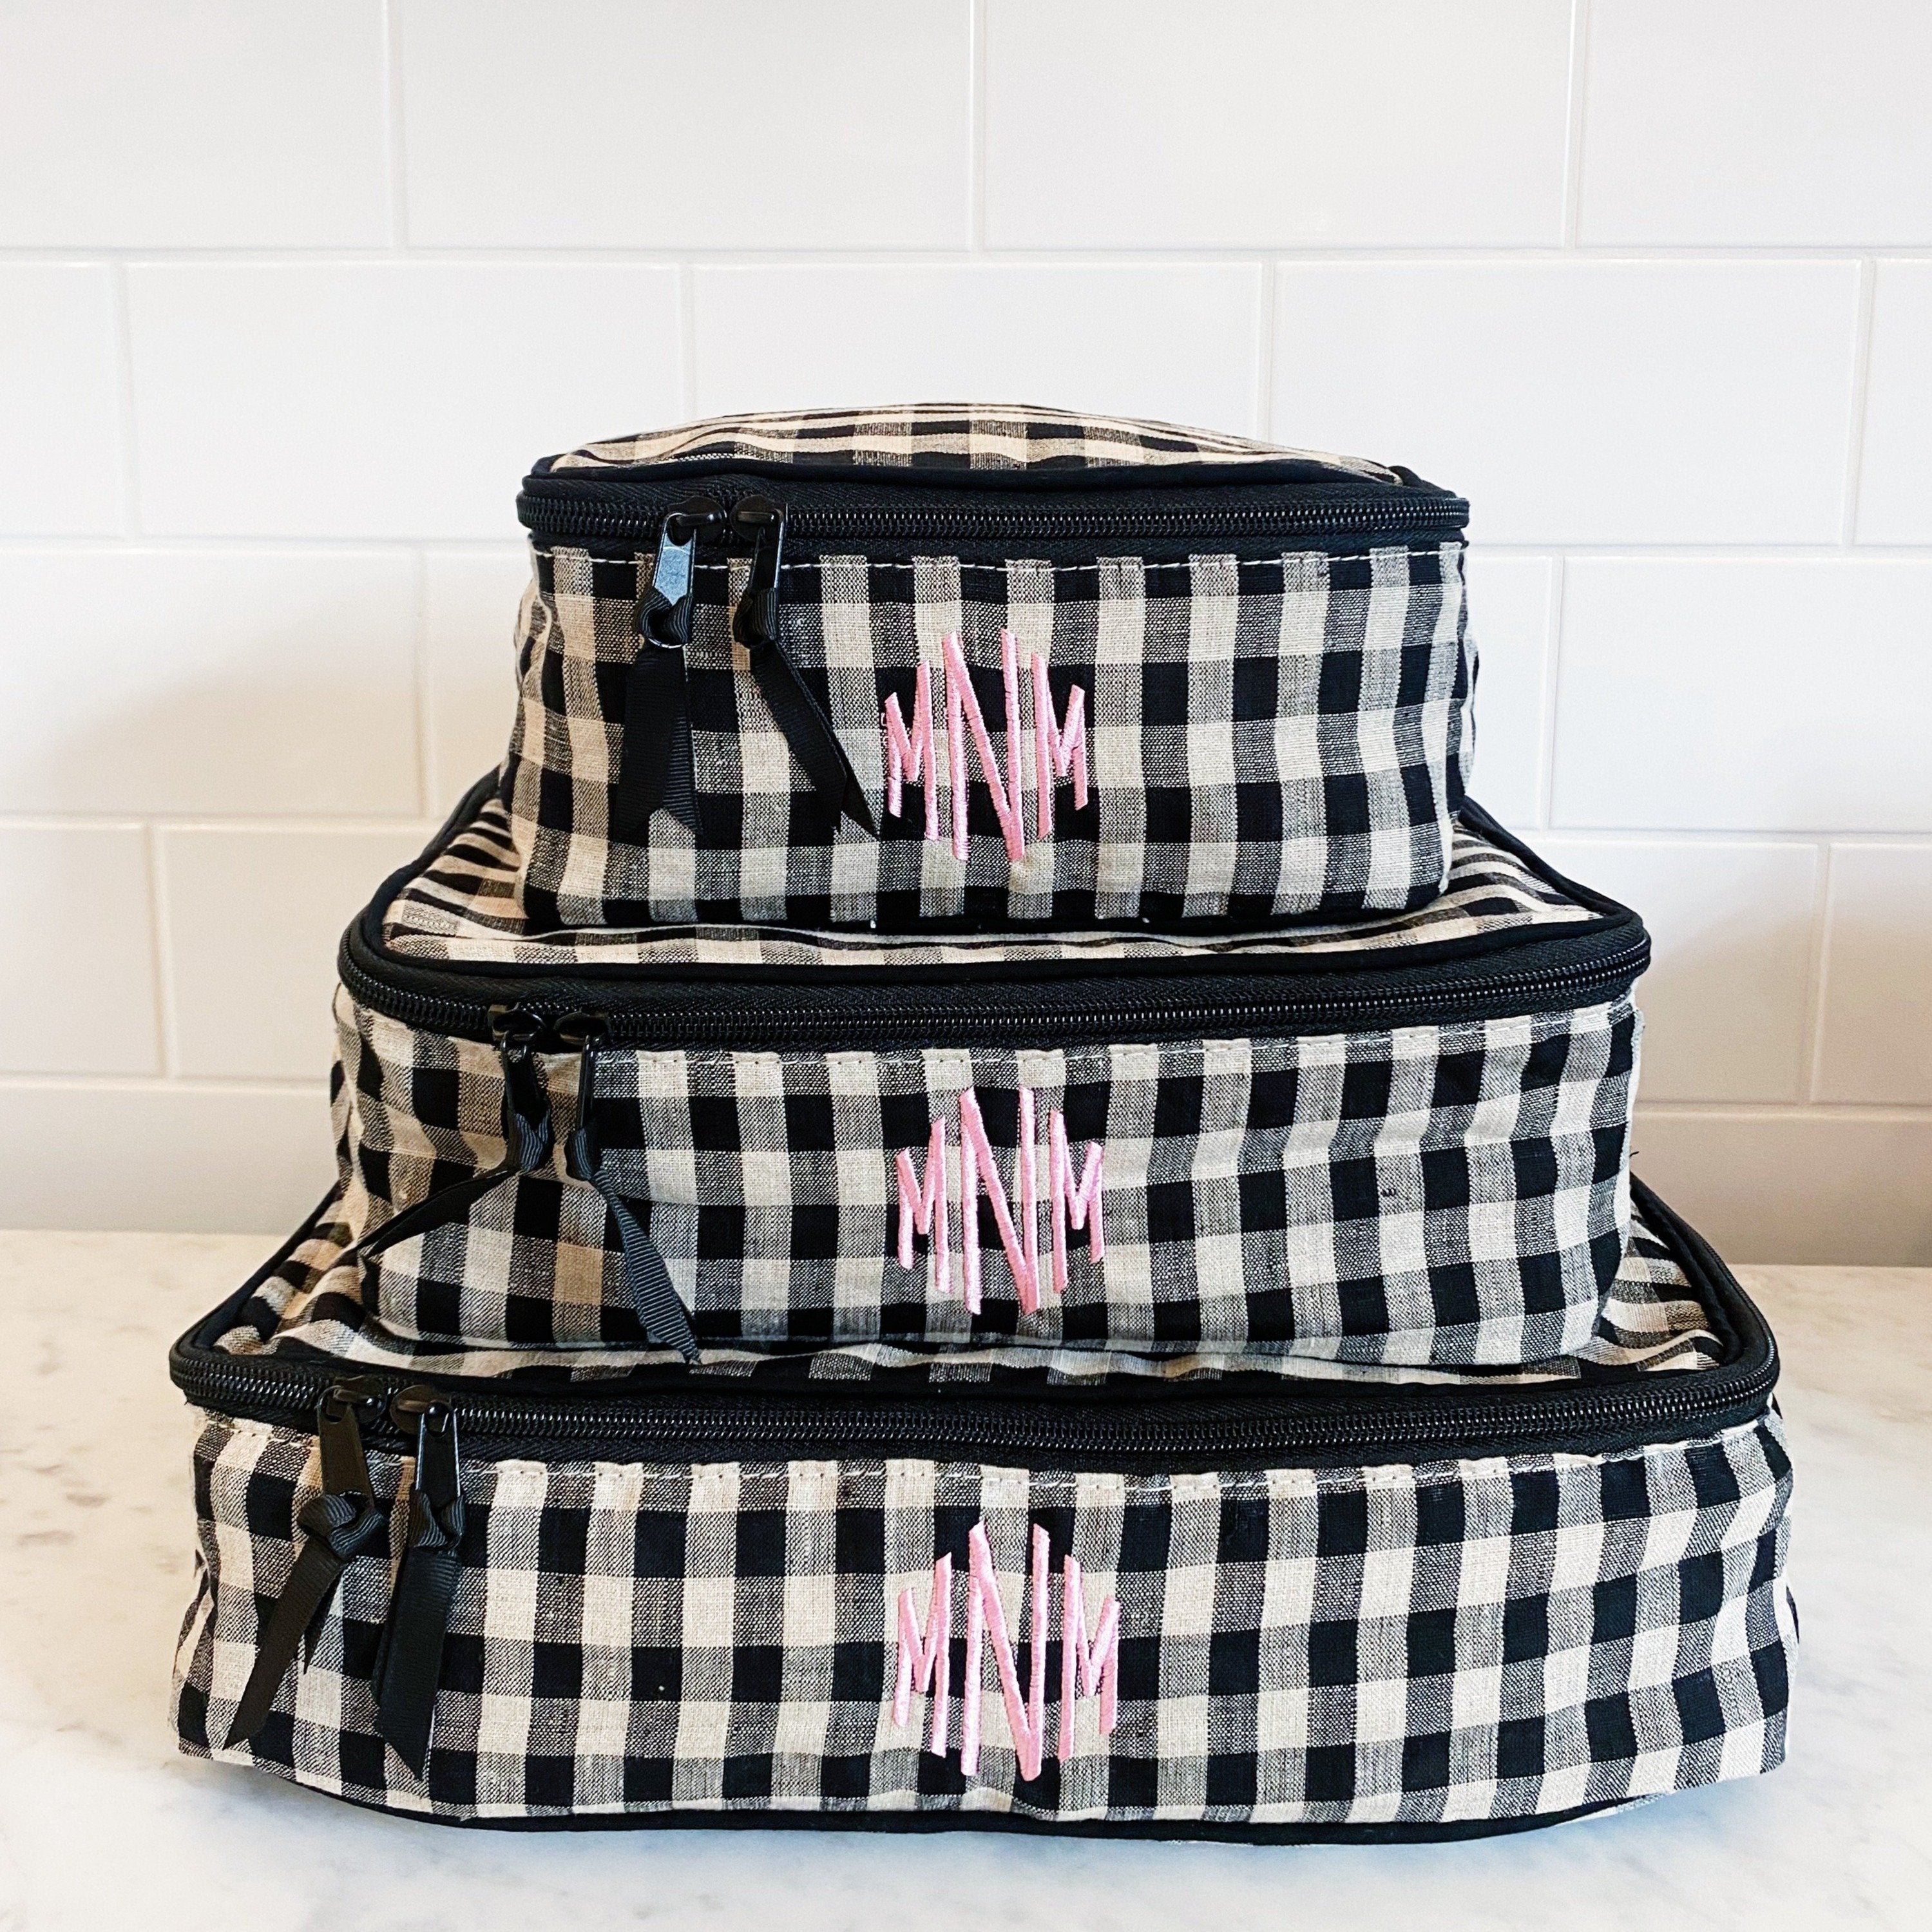 Linen Packing Cubes, 3-pack Gingham